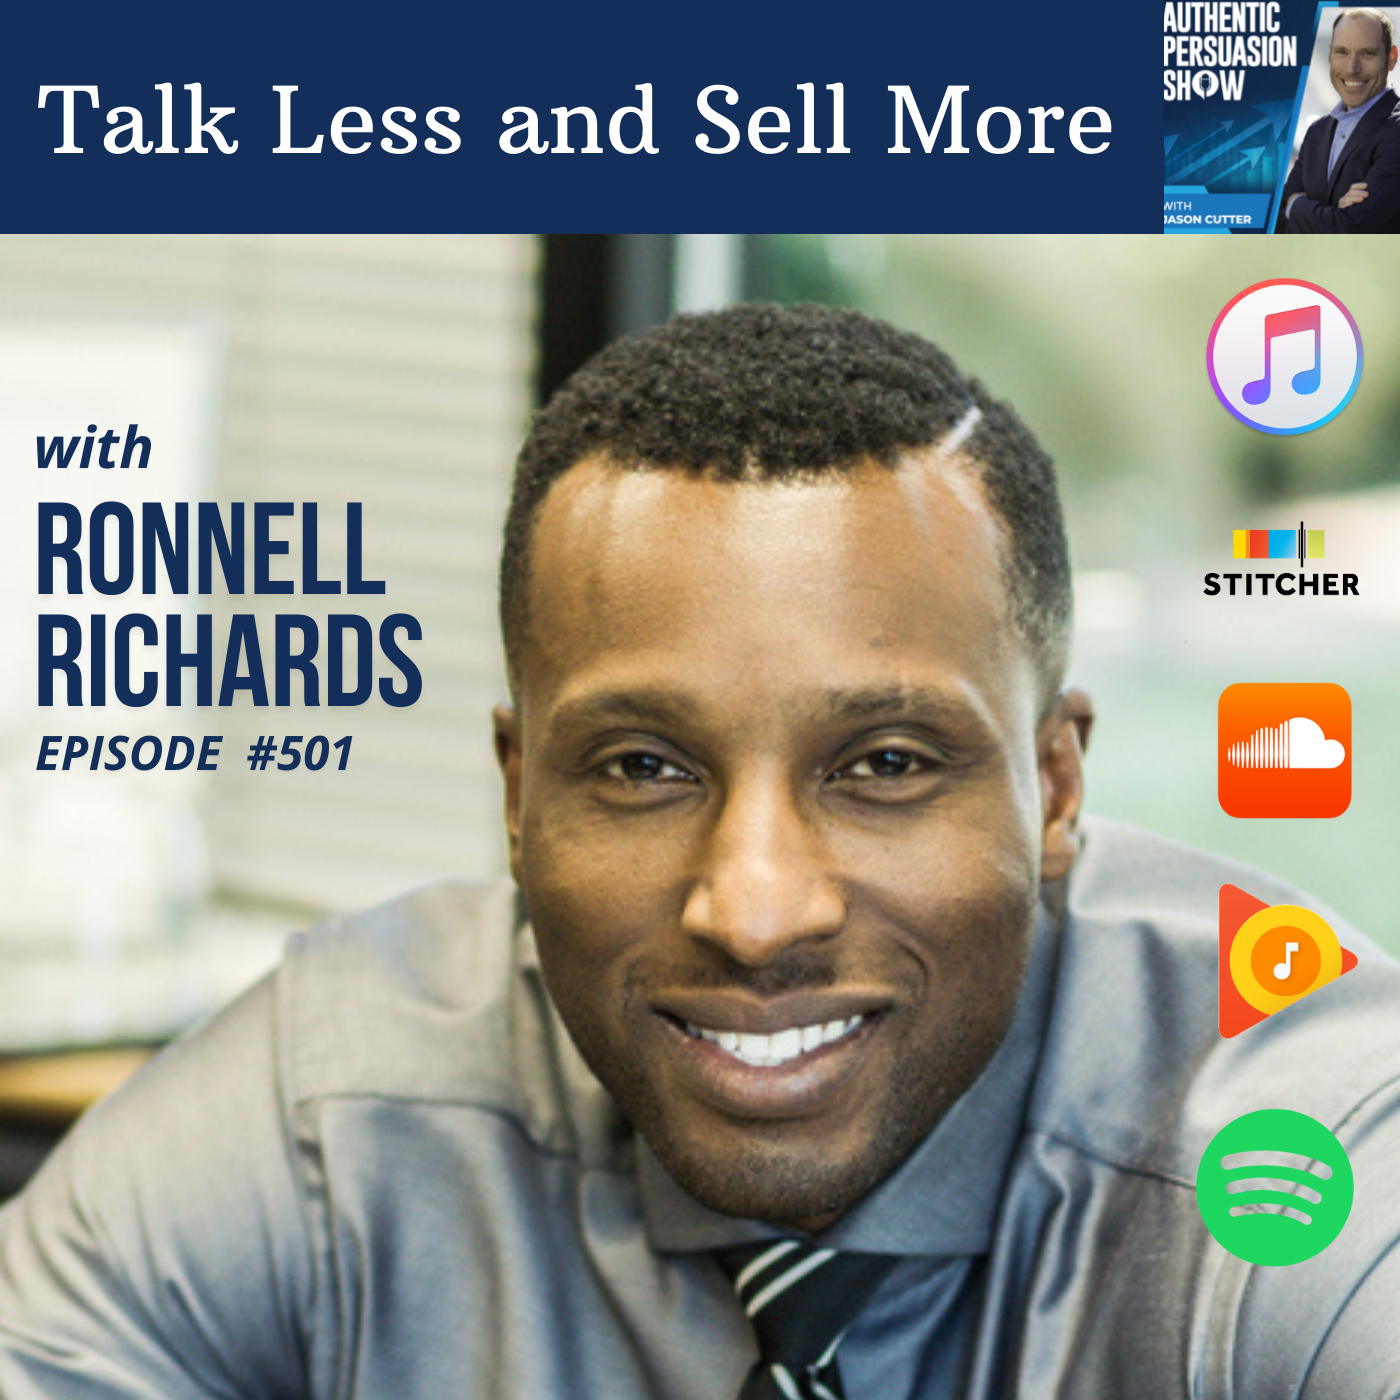 [501] Talk Less and Sell More, with Ronnell Richards from Business & Bourbon